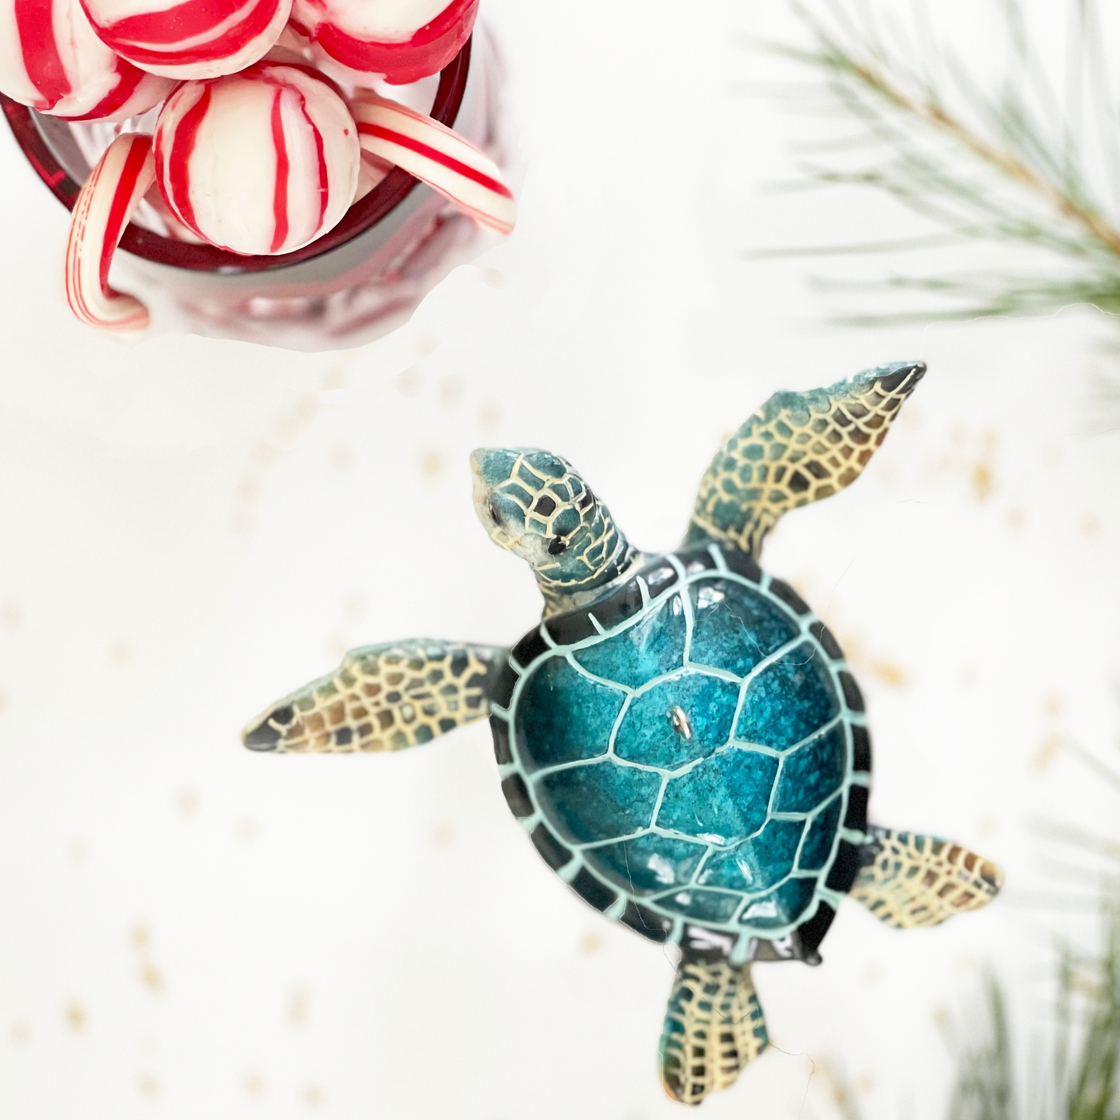 rengöra's blue sea turtle ornament shown swimming towards peppermint candies with a pine bough in the background